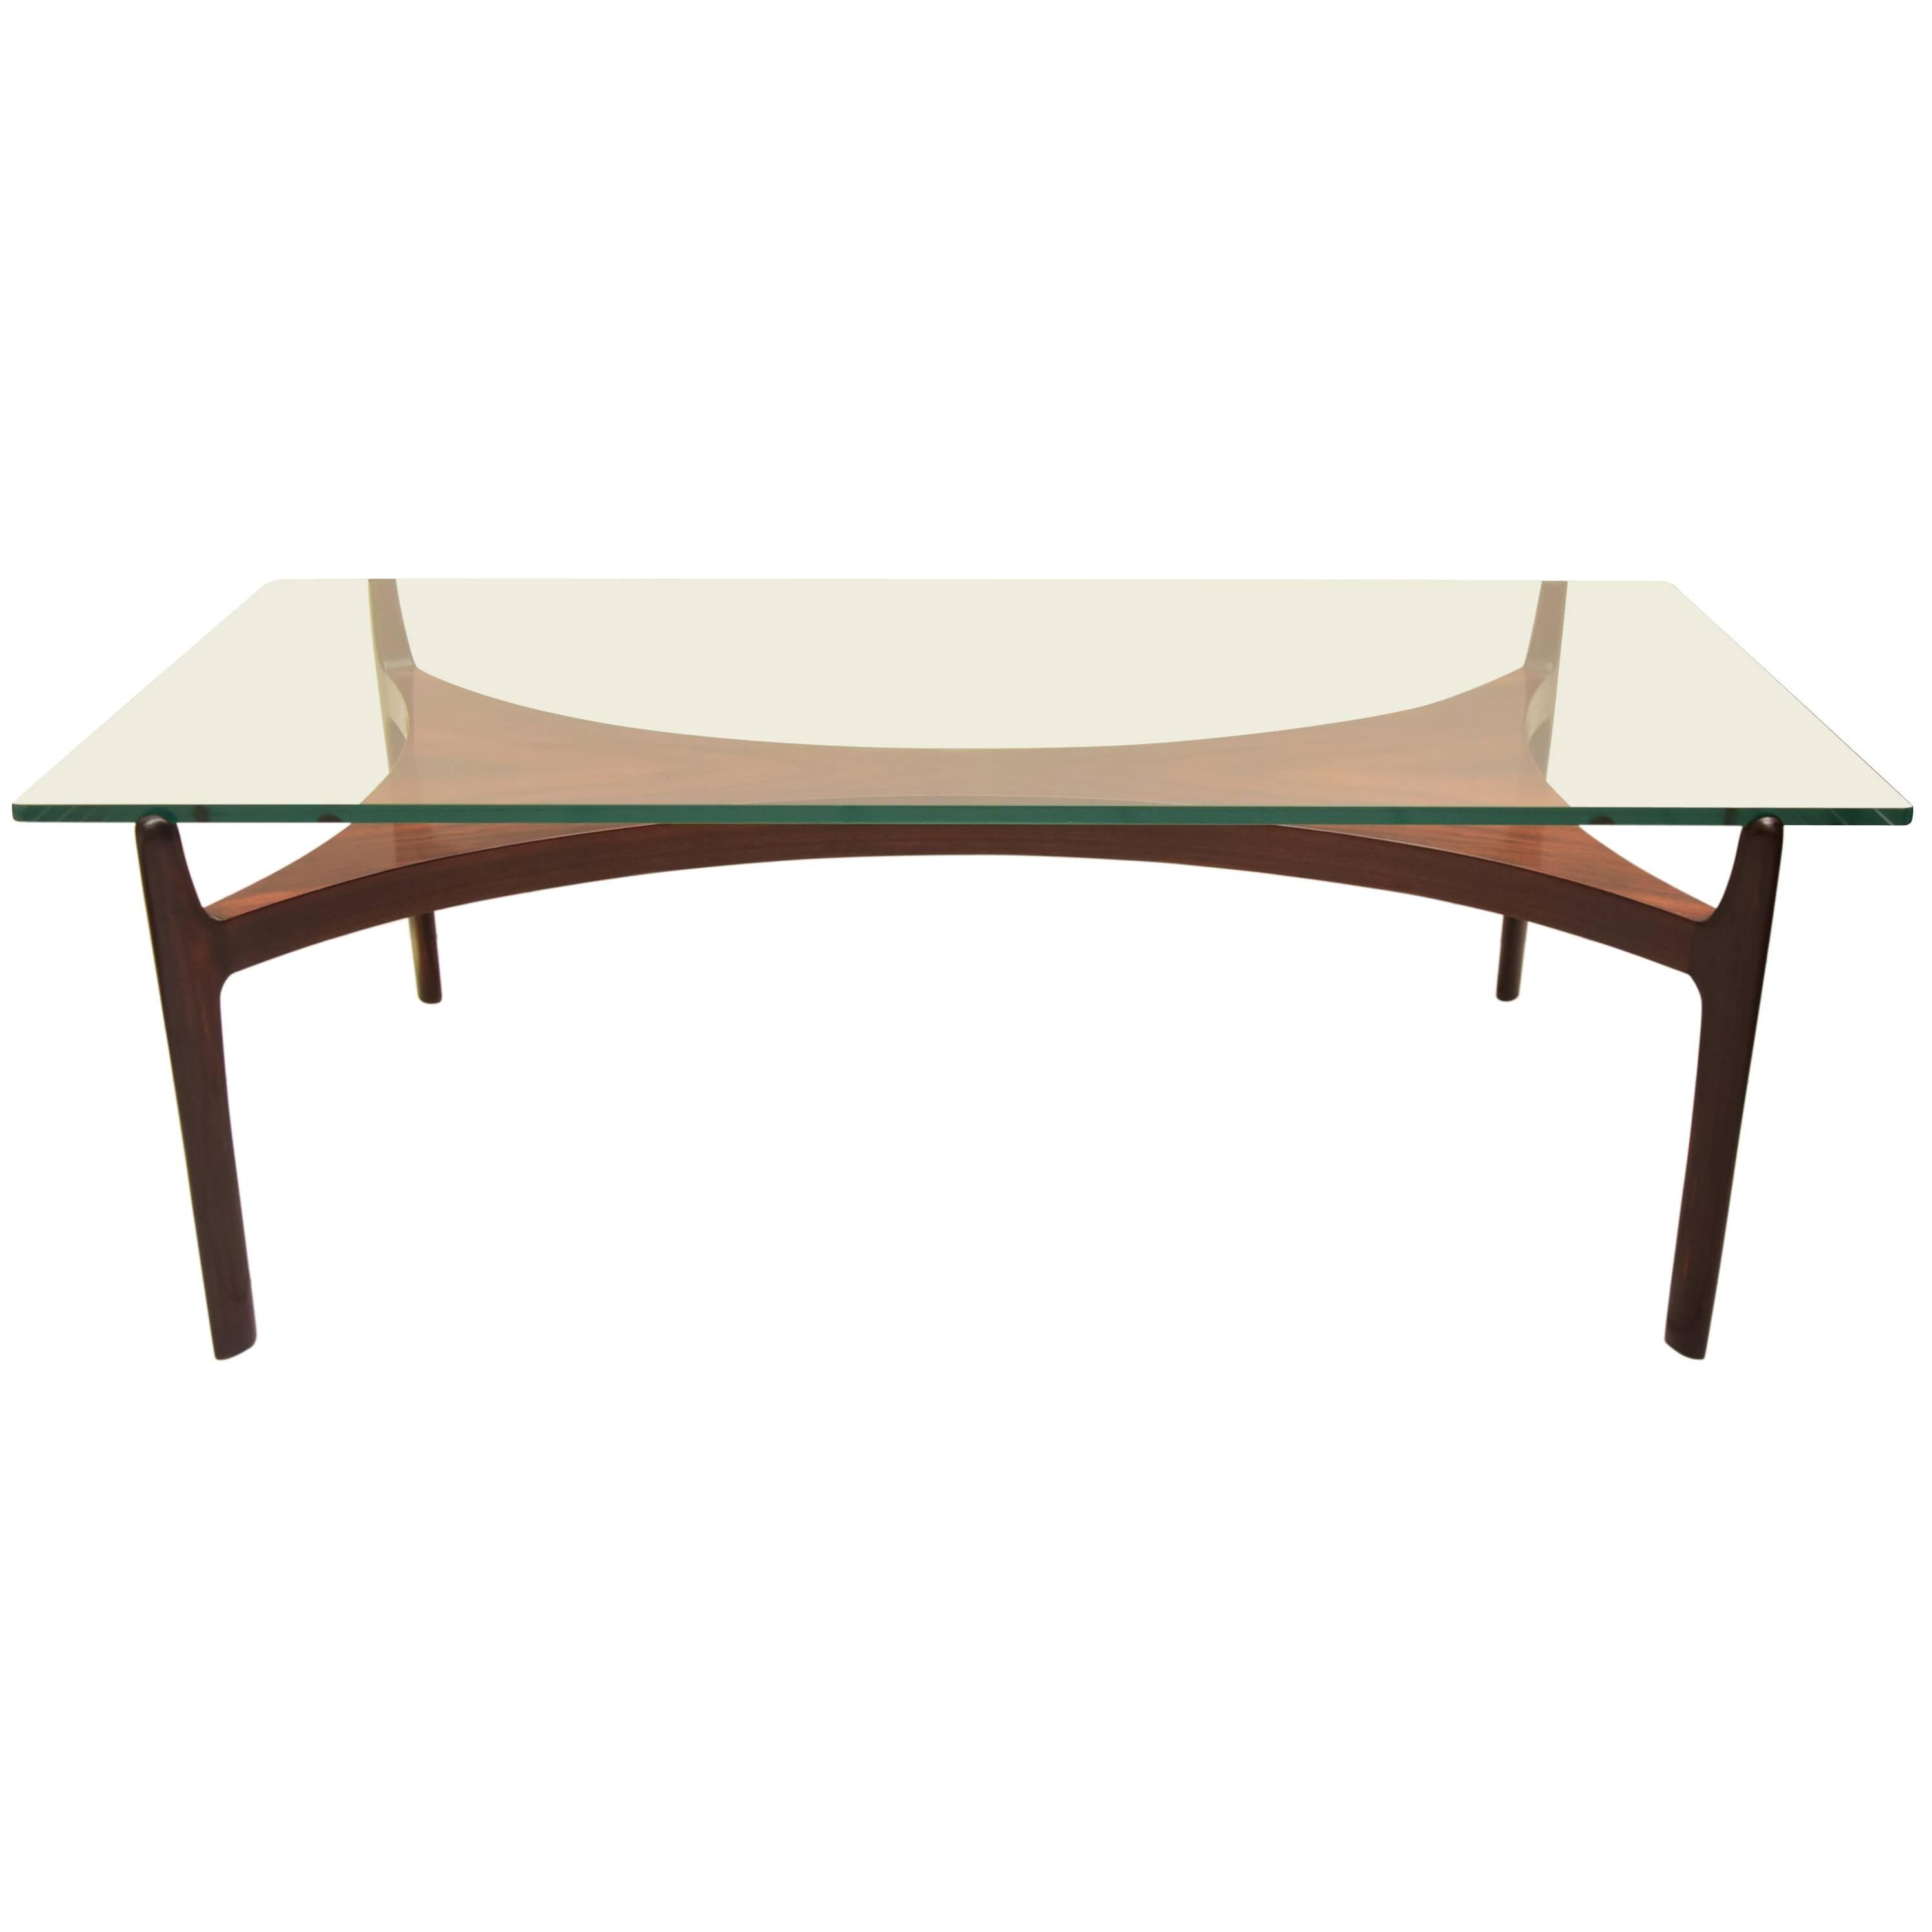 Rare Rosewood and Glass Coffee Table by Sven Ellekaer for Christian Linneberg For Sale